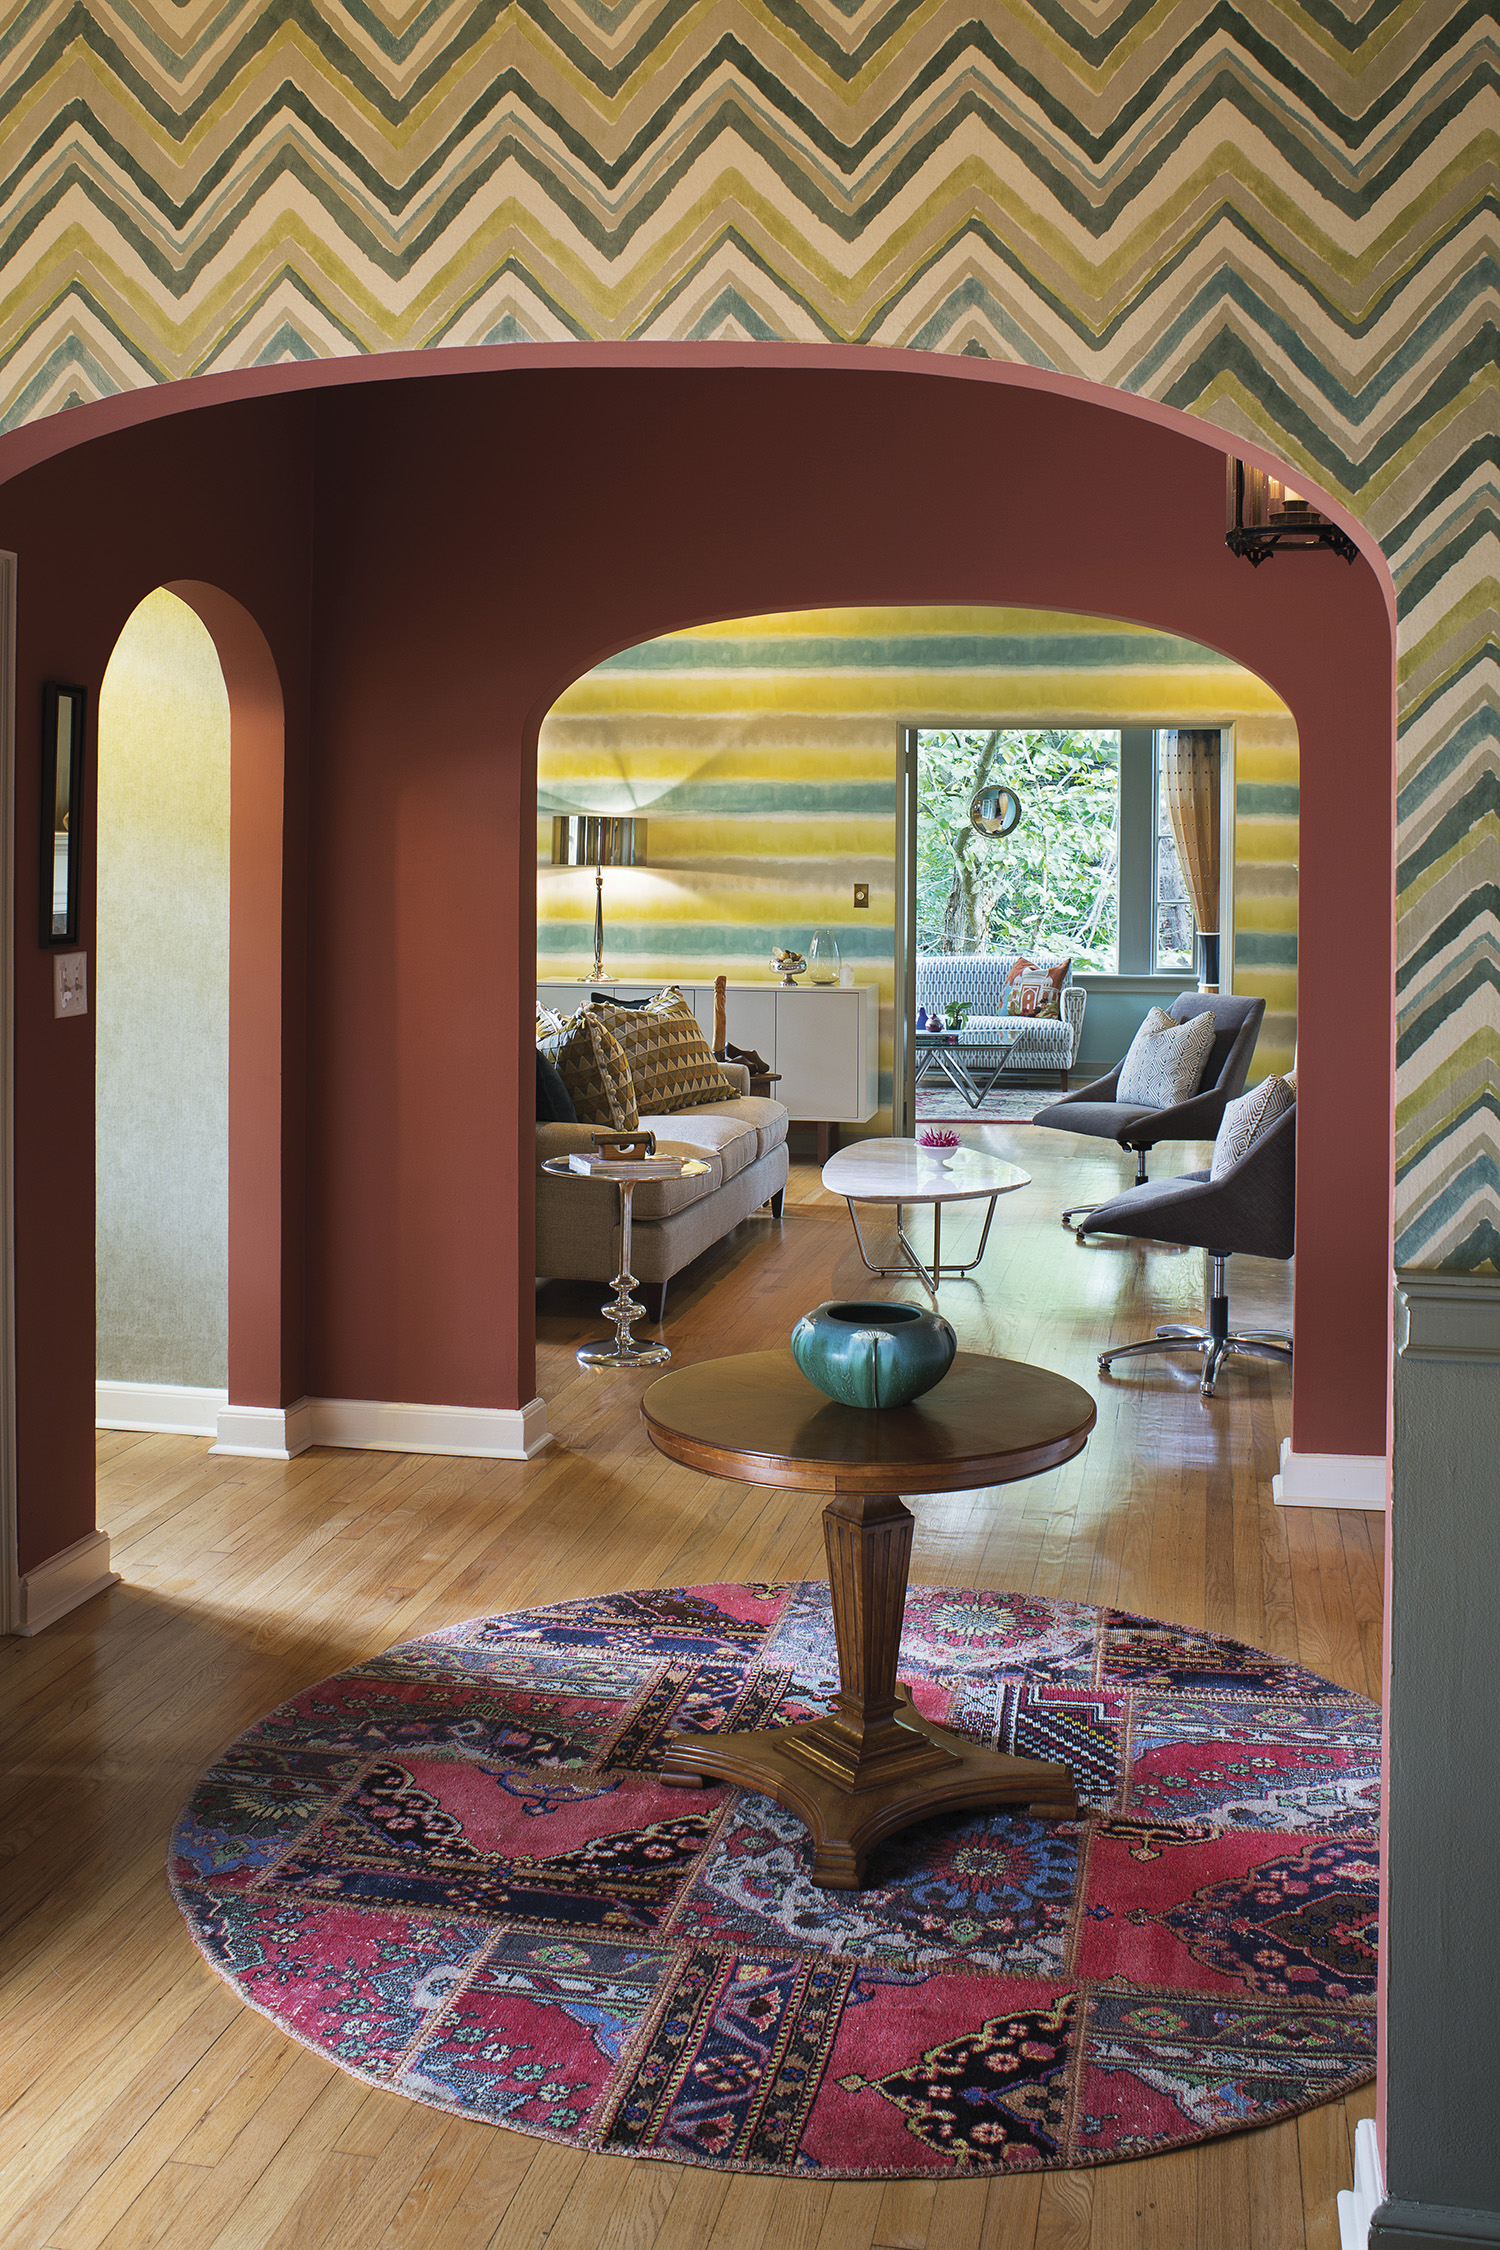 The warm color in the foyer matches the hue of the exterior brick and becomes a roomy central circulation space against the cool colors of the living and dining areas, decorated with wallpaper from Sanderson and Harlequin brands. Rug from Togar. Photo by David Dietrich